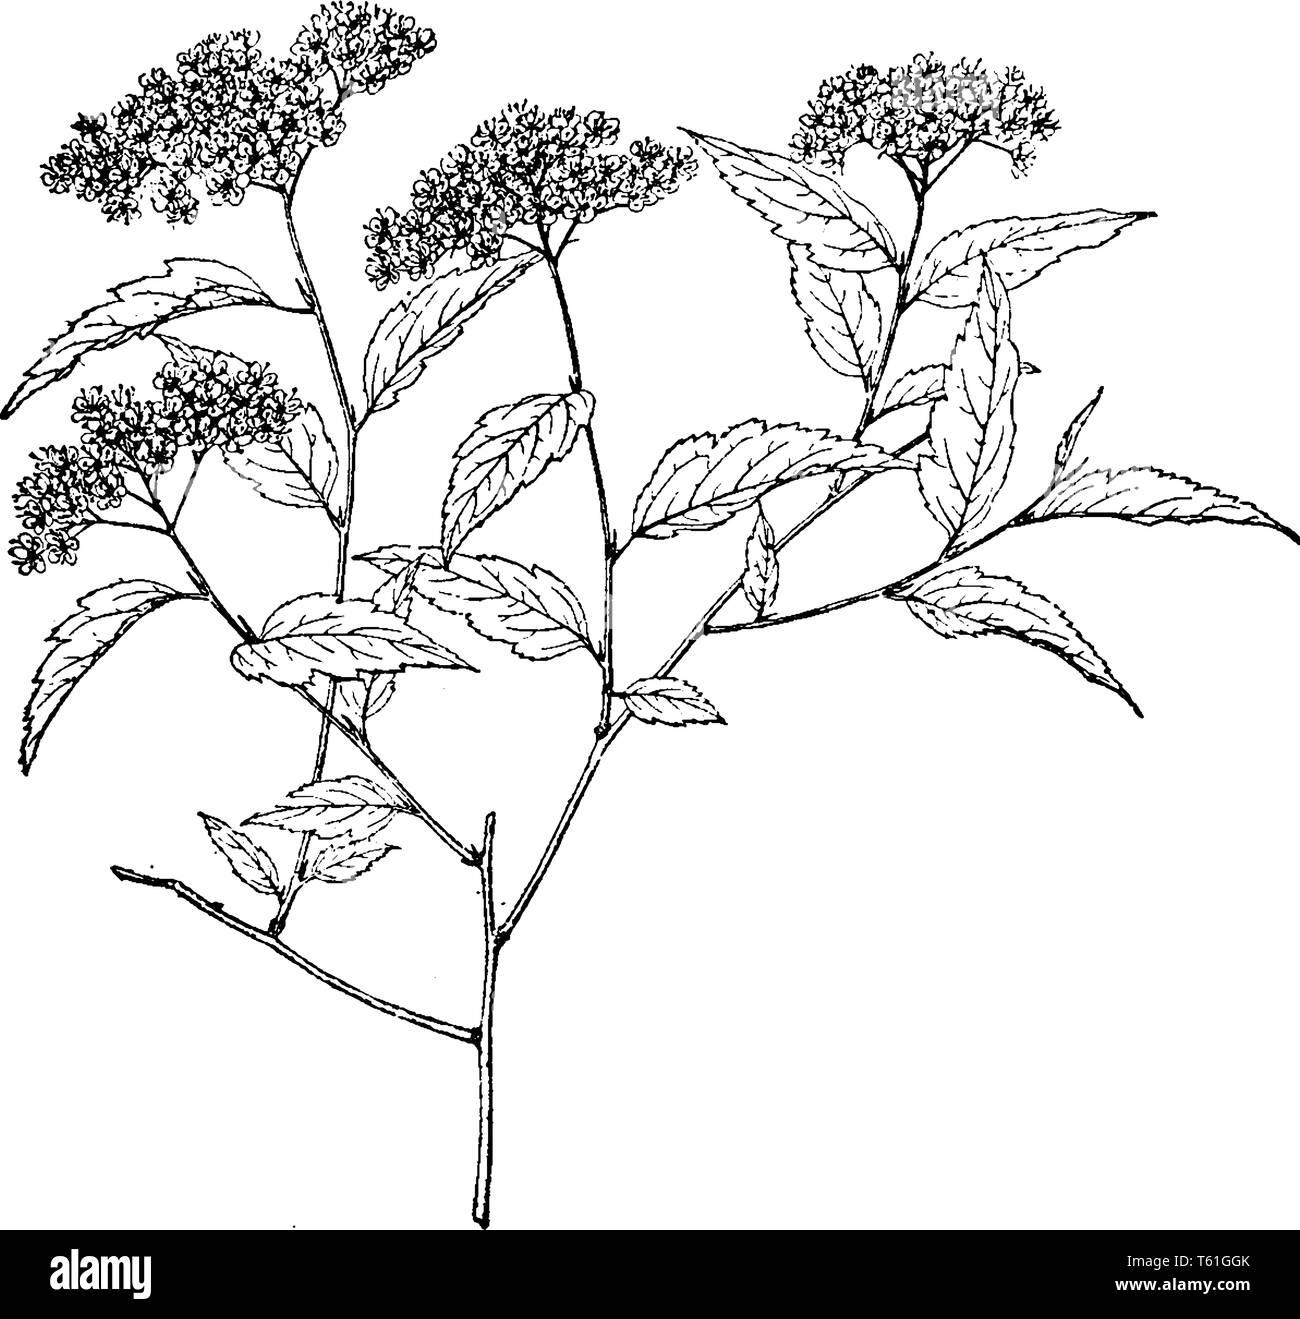 This is a floral branch of Spiraea Longigemmis. The flowers have five sepals and five white, pink, or reddish petals, vintage line drawing or engravin Stock Vector